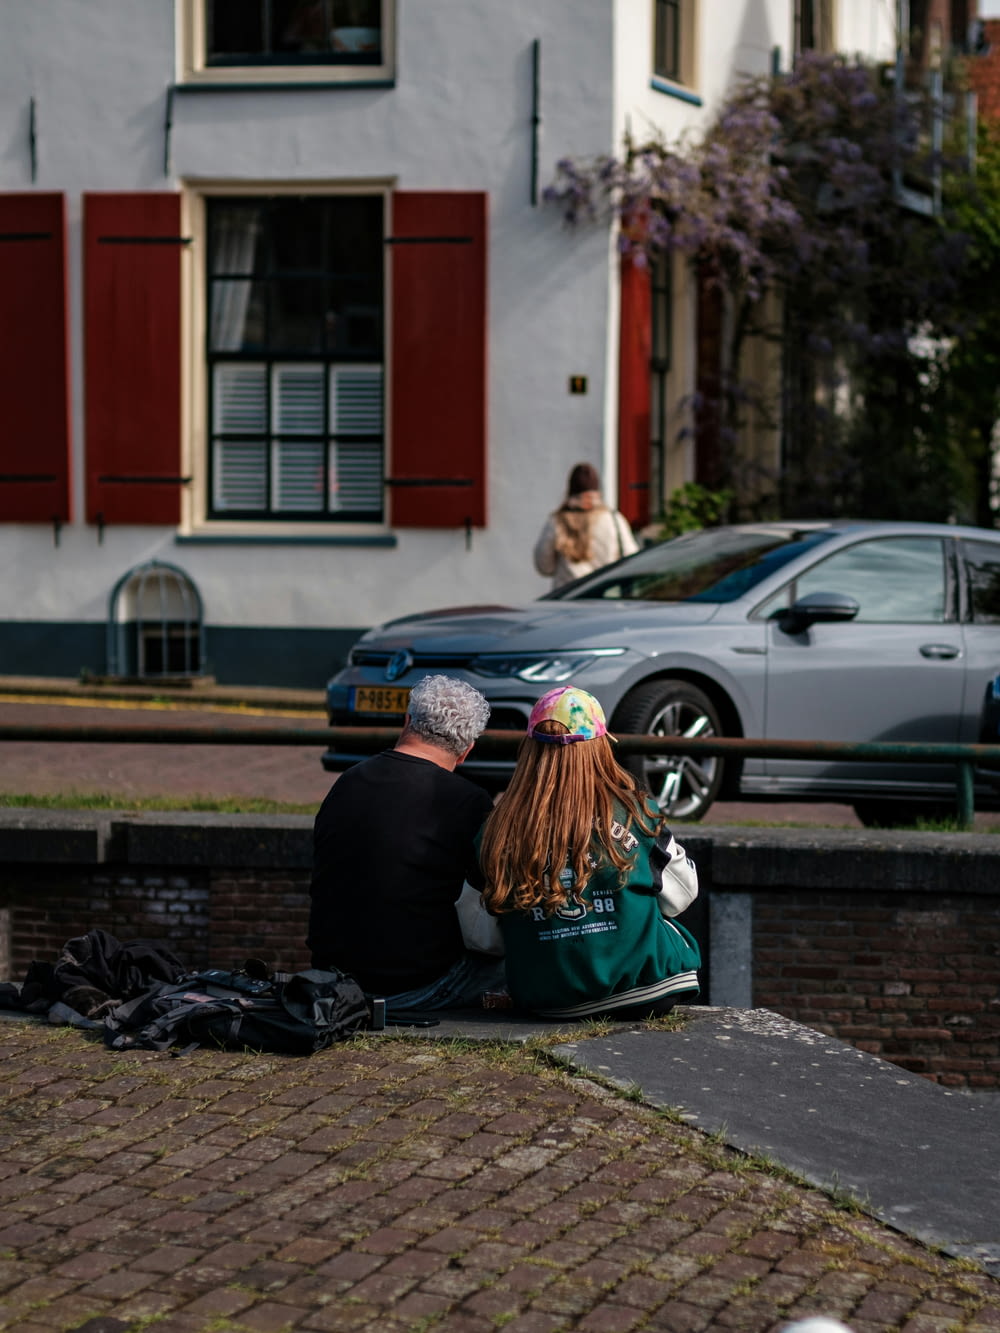 a man and a woman sitting on a bench in front of a building